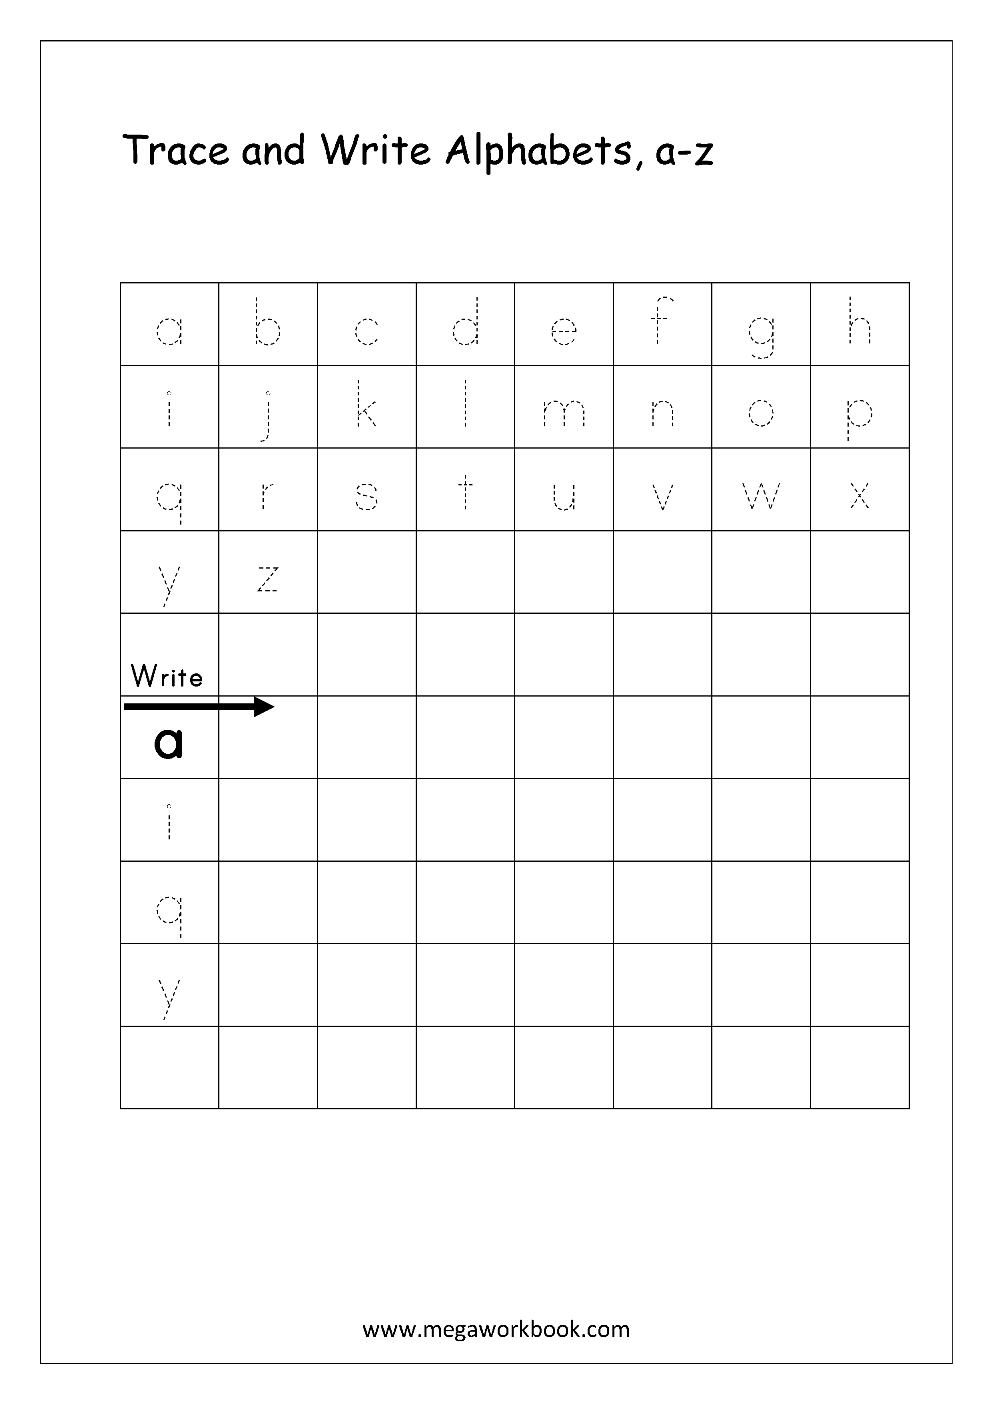 Alphabet Writing - Small Letters (Lowercase) - Alphabet Writing